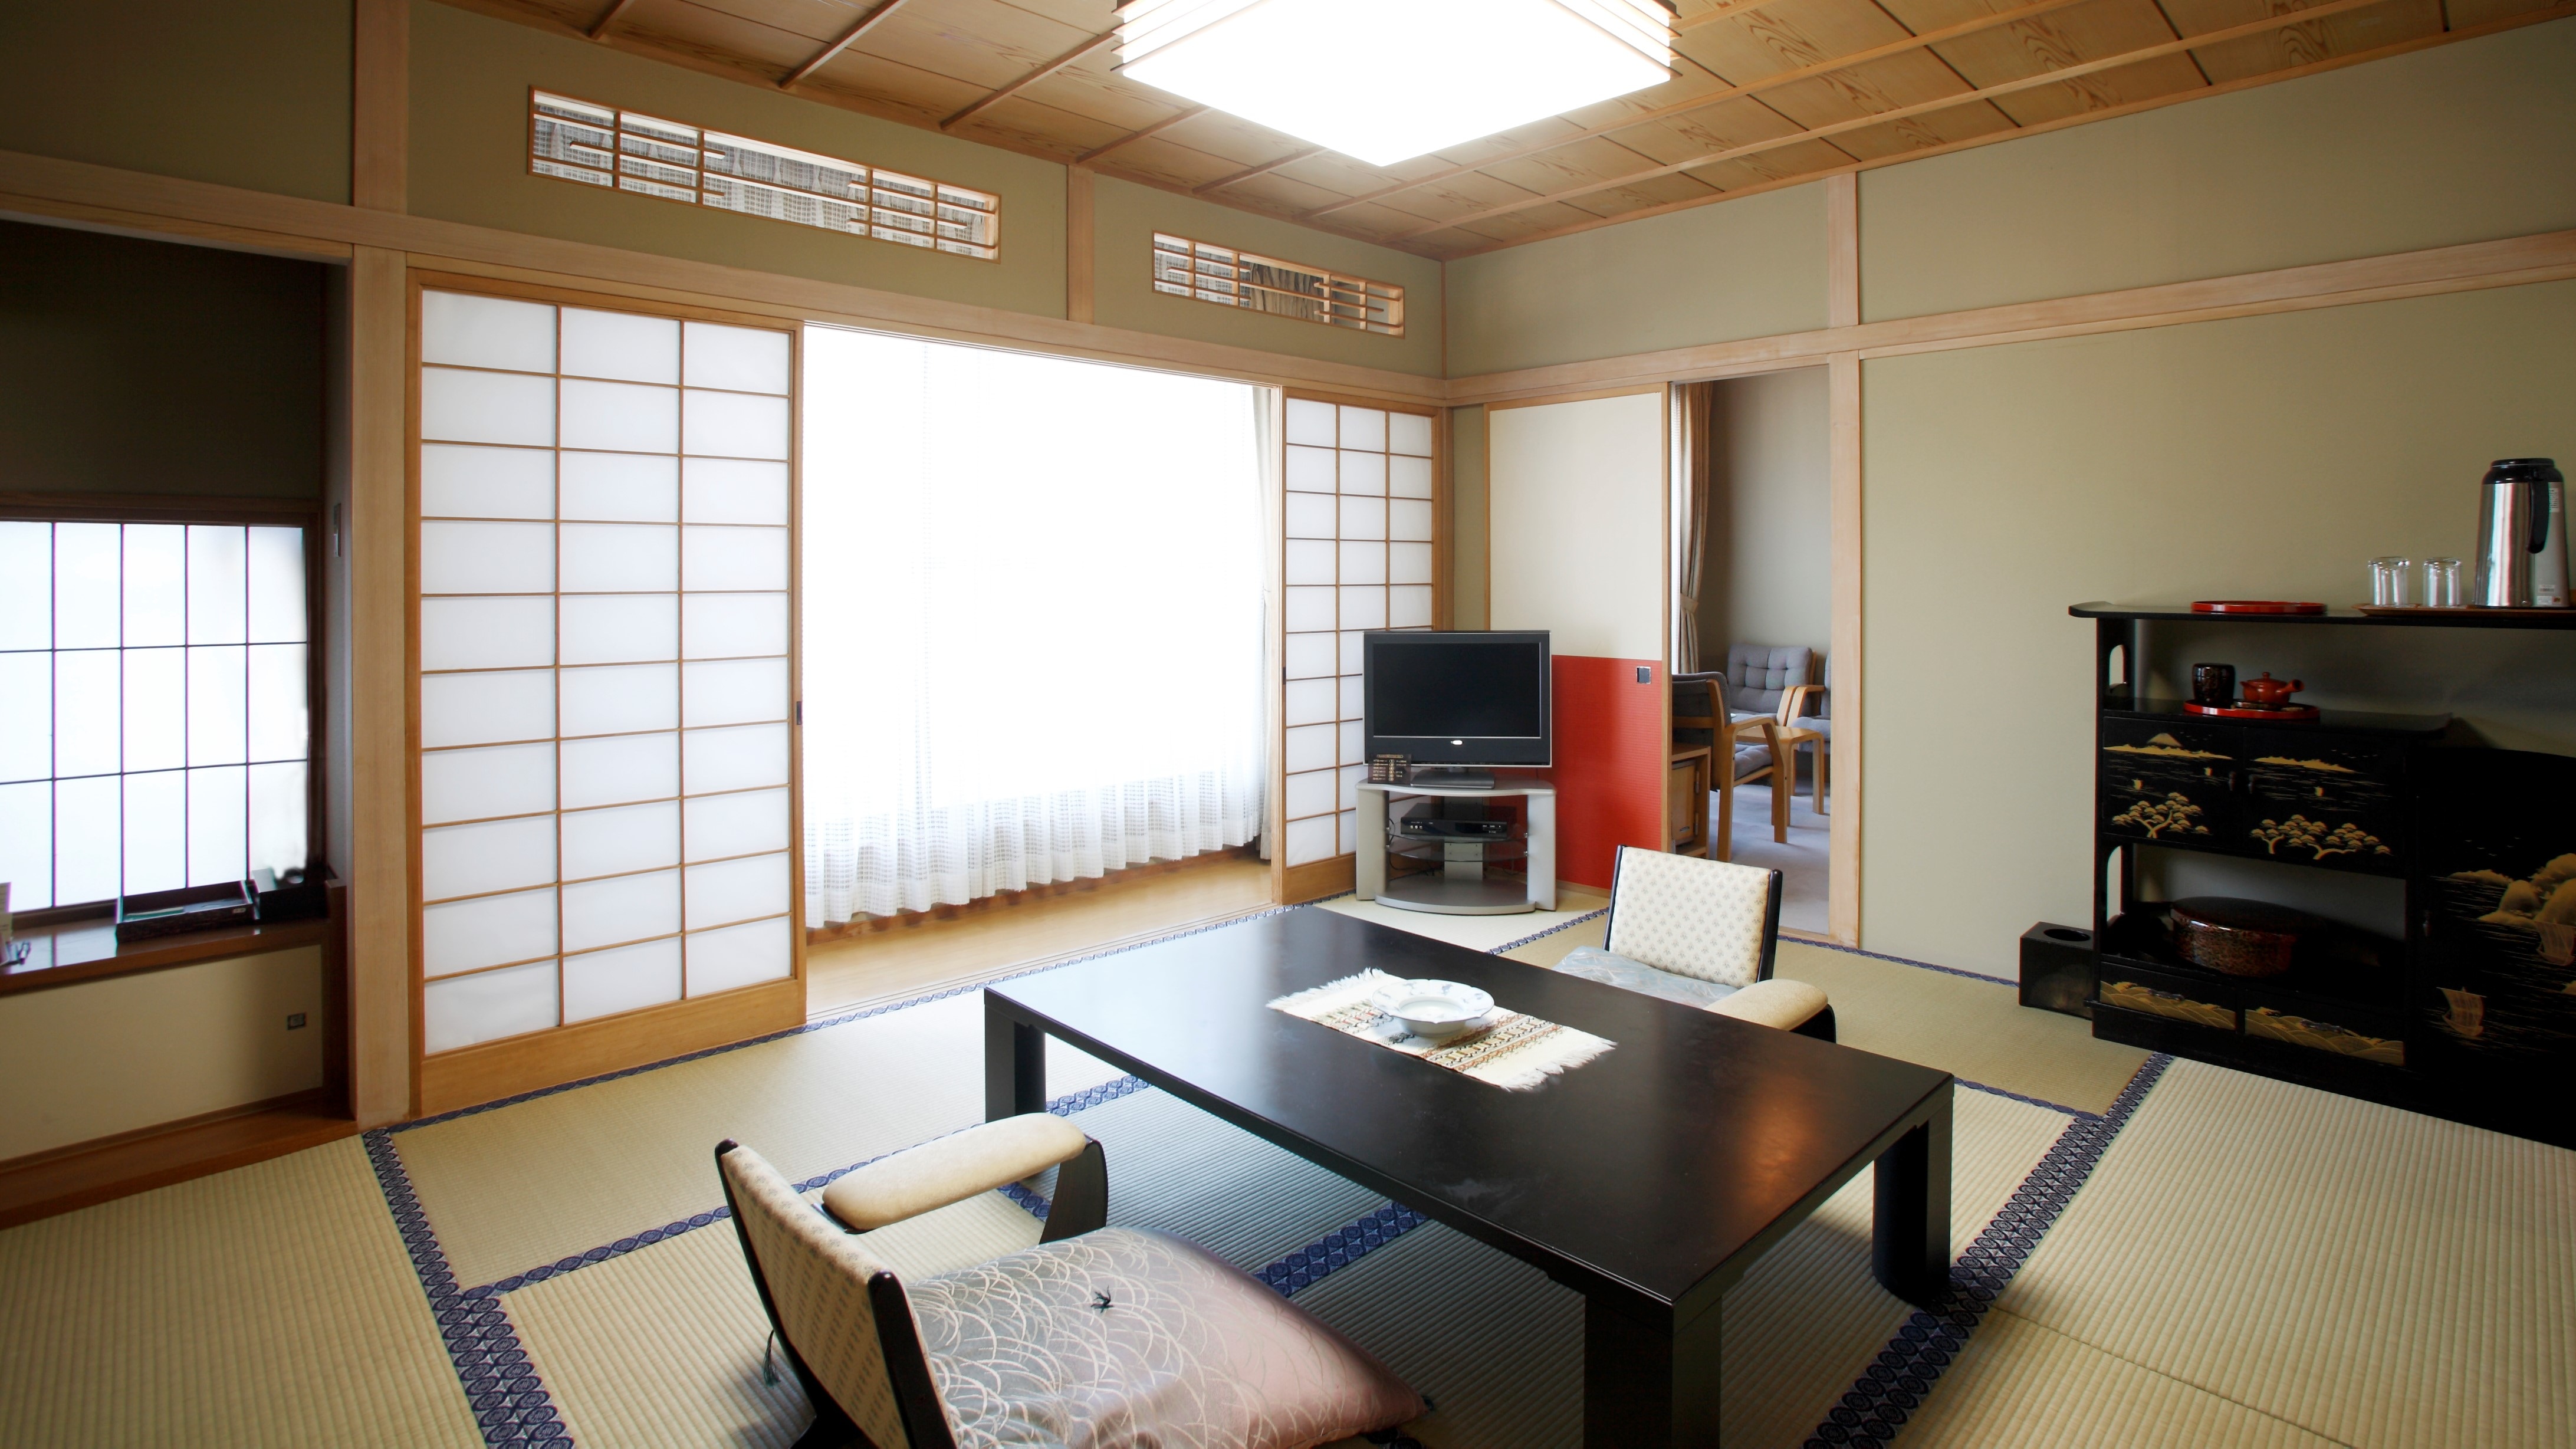 ◆ Special room Japanese-style room / 2 rooms with plenty of space. It is a high-quality space with a Japanese spirit. (Example of guest room)